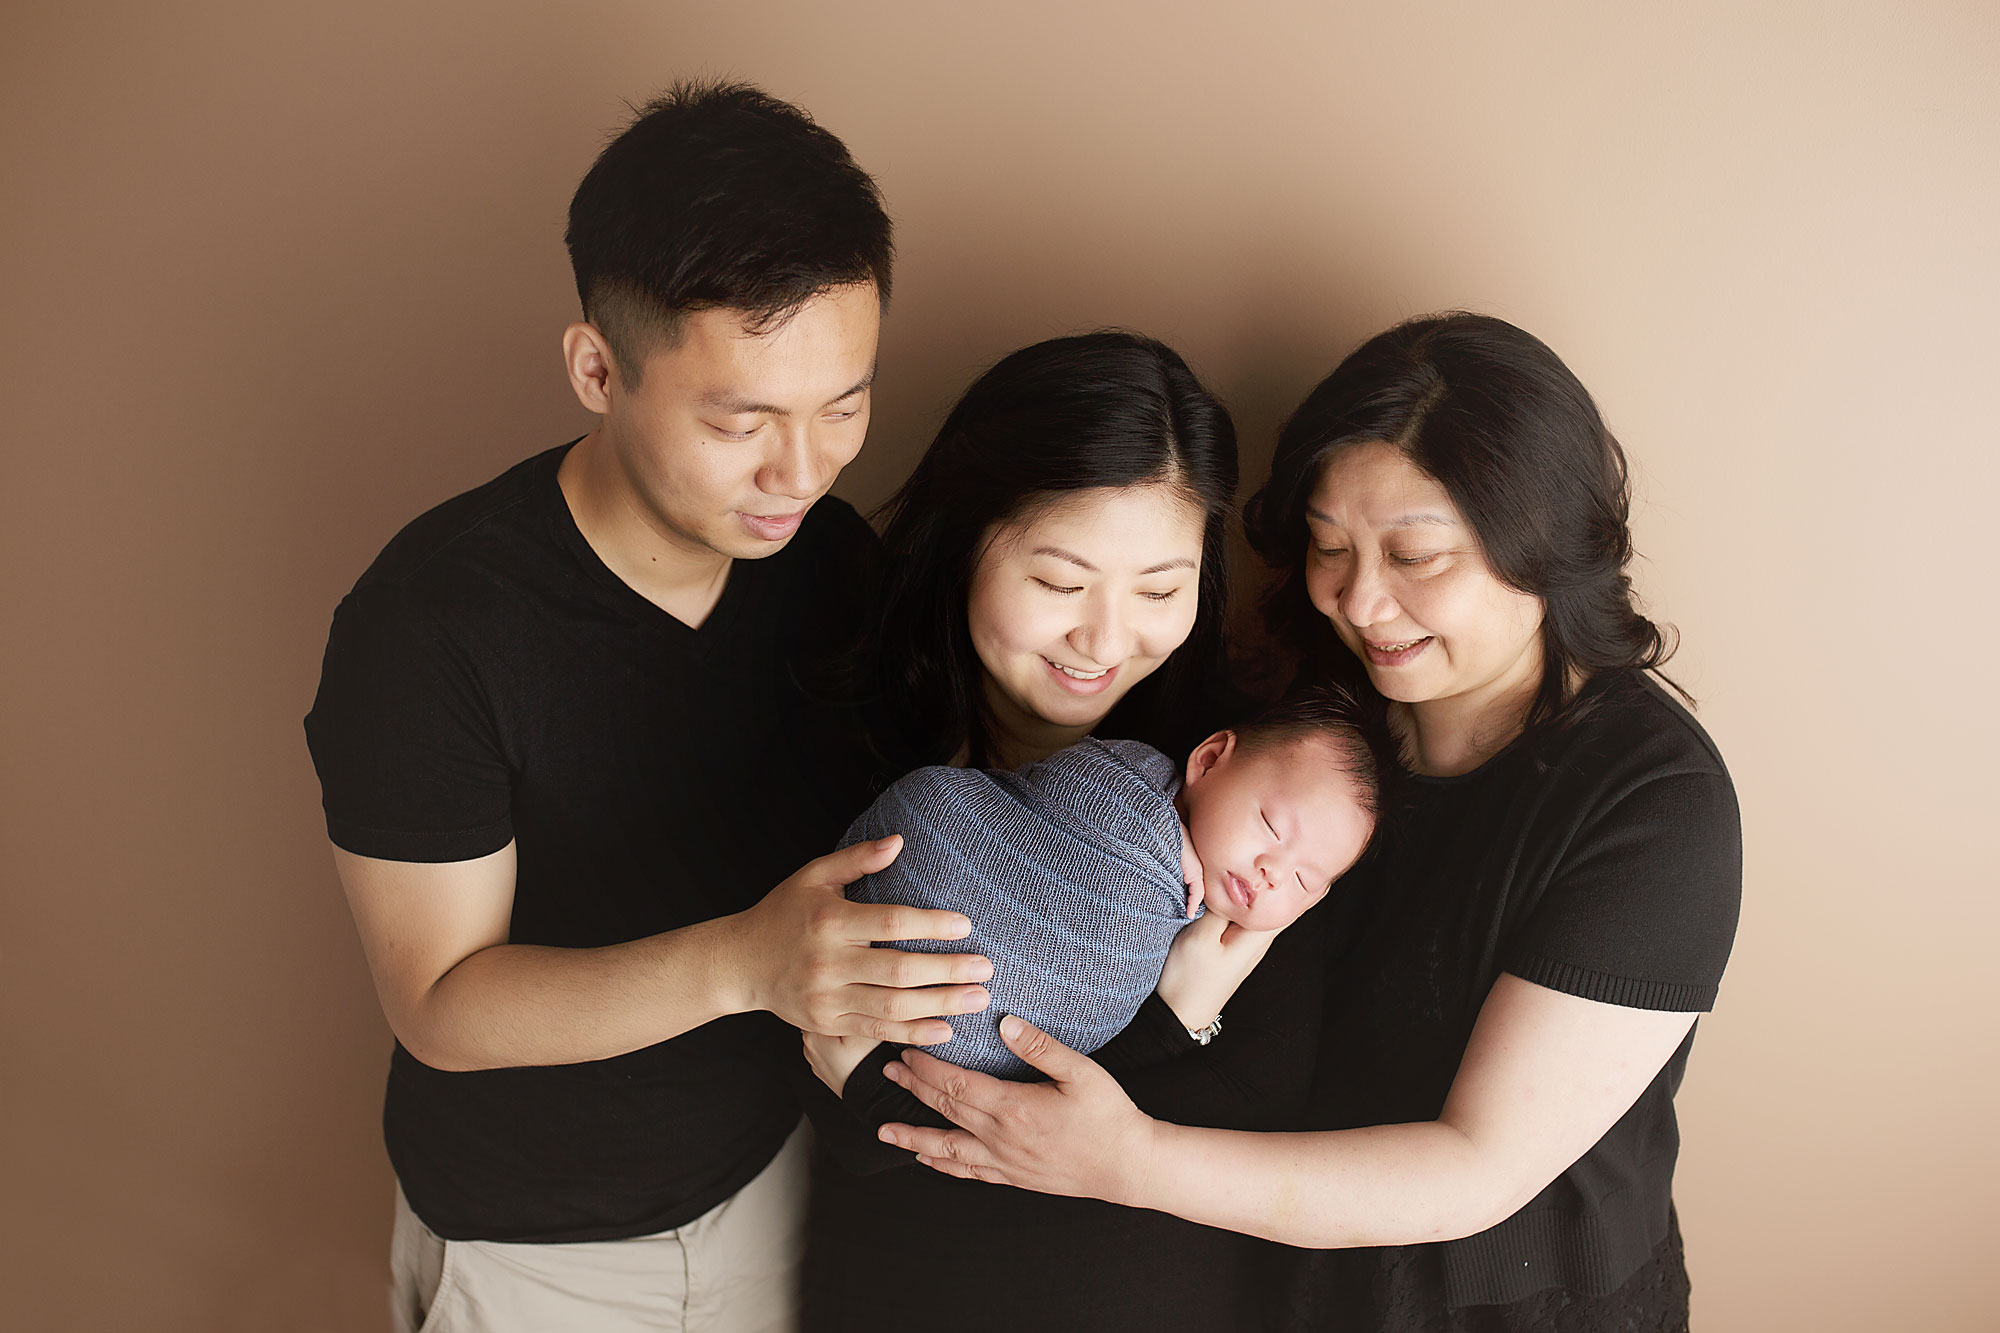 newborn photography in morris county